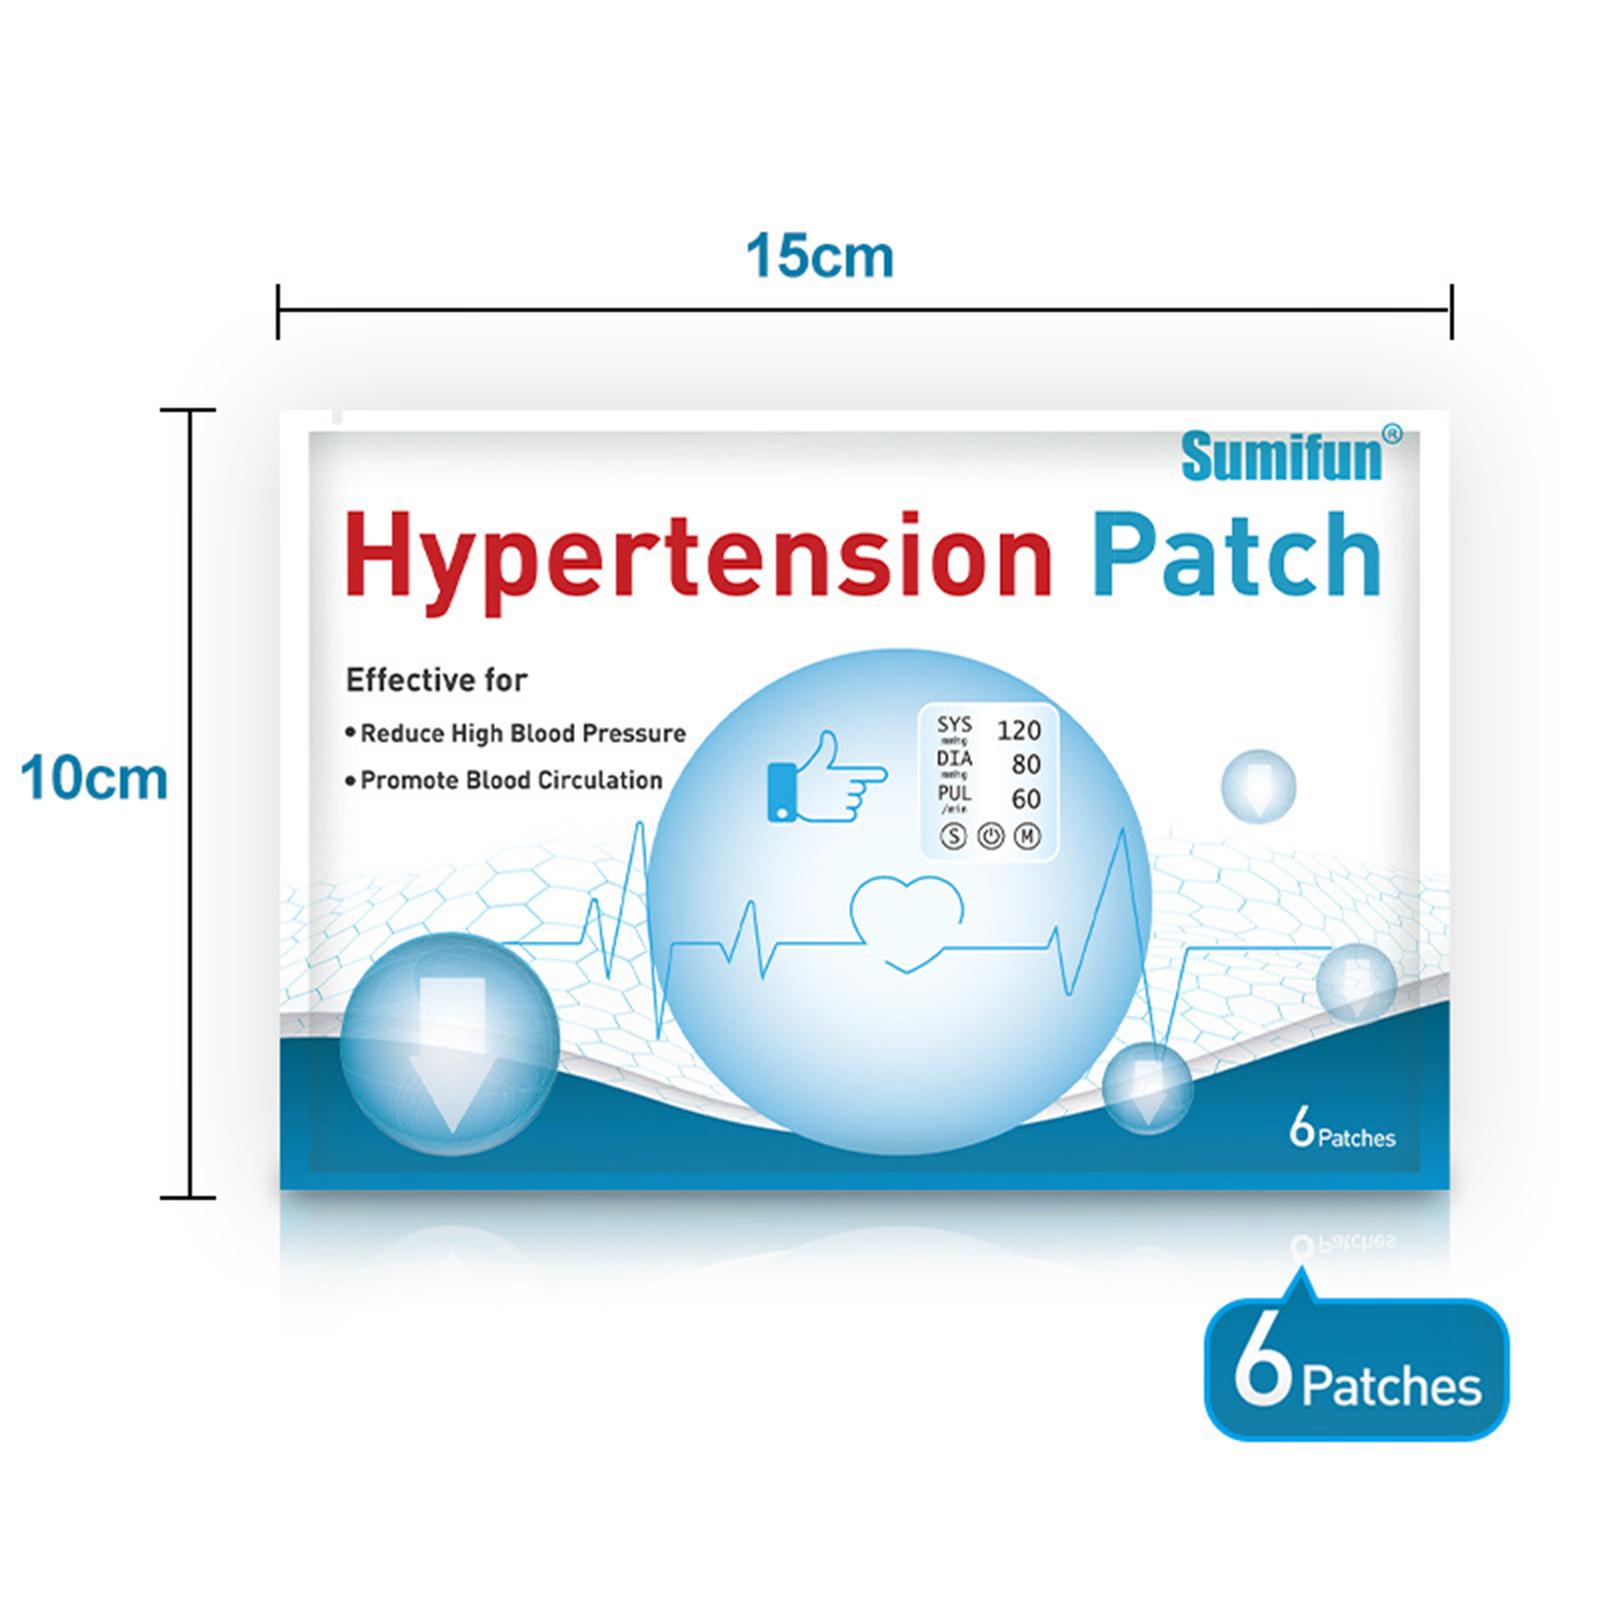 Sumifun 6 Patches Hypertension Patch Reduce High Blood Pressure Health Care Paste